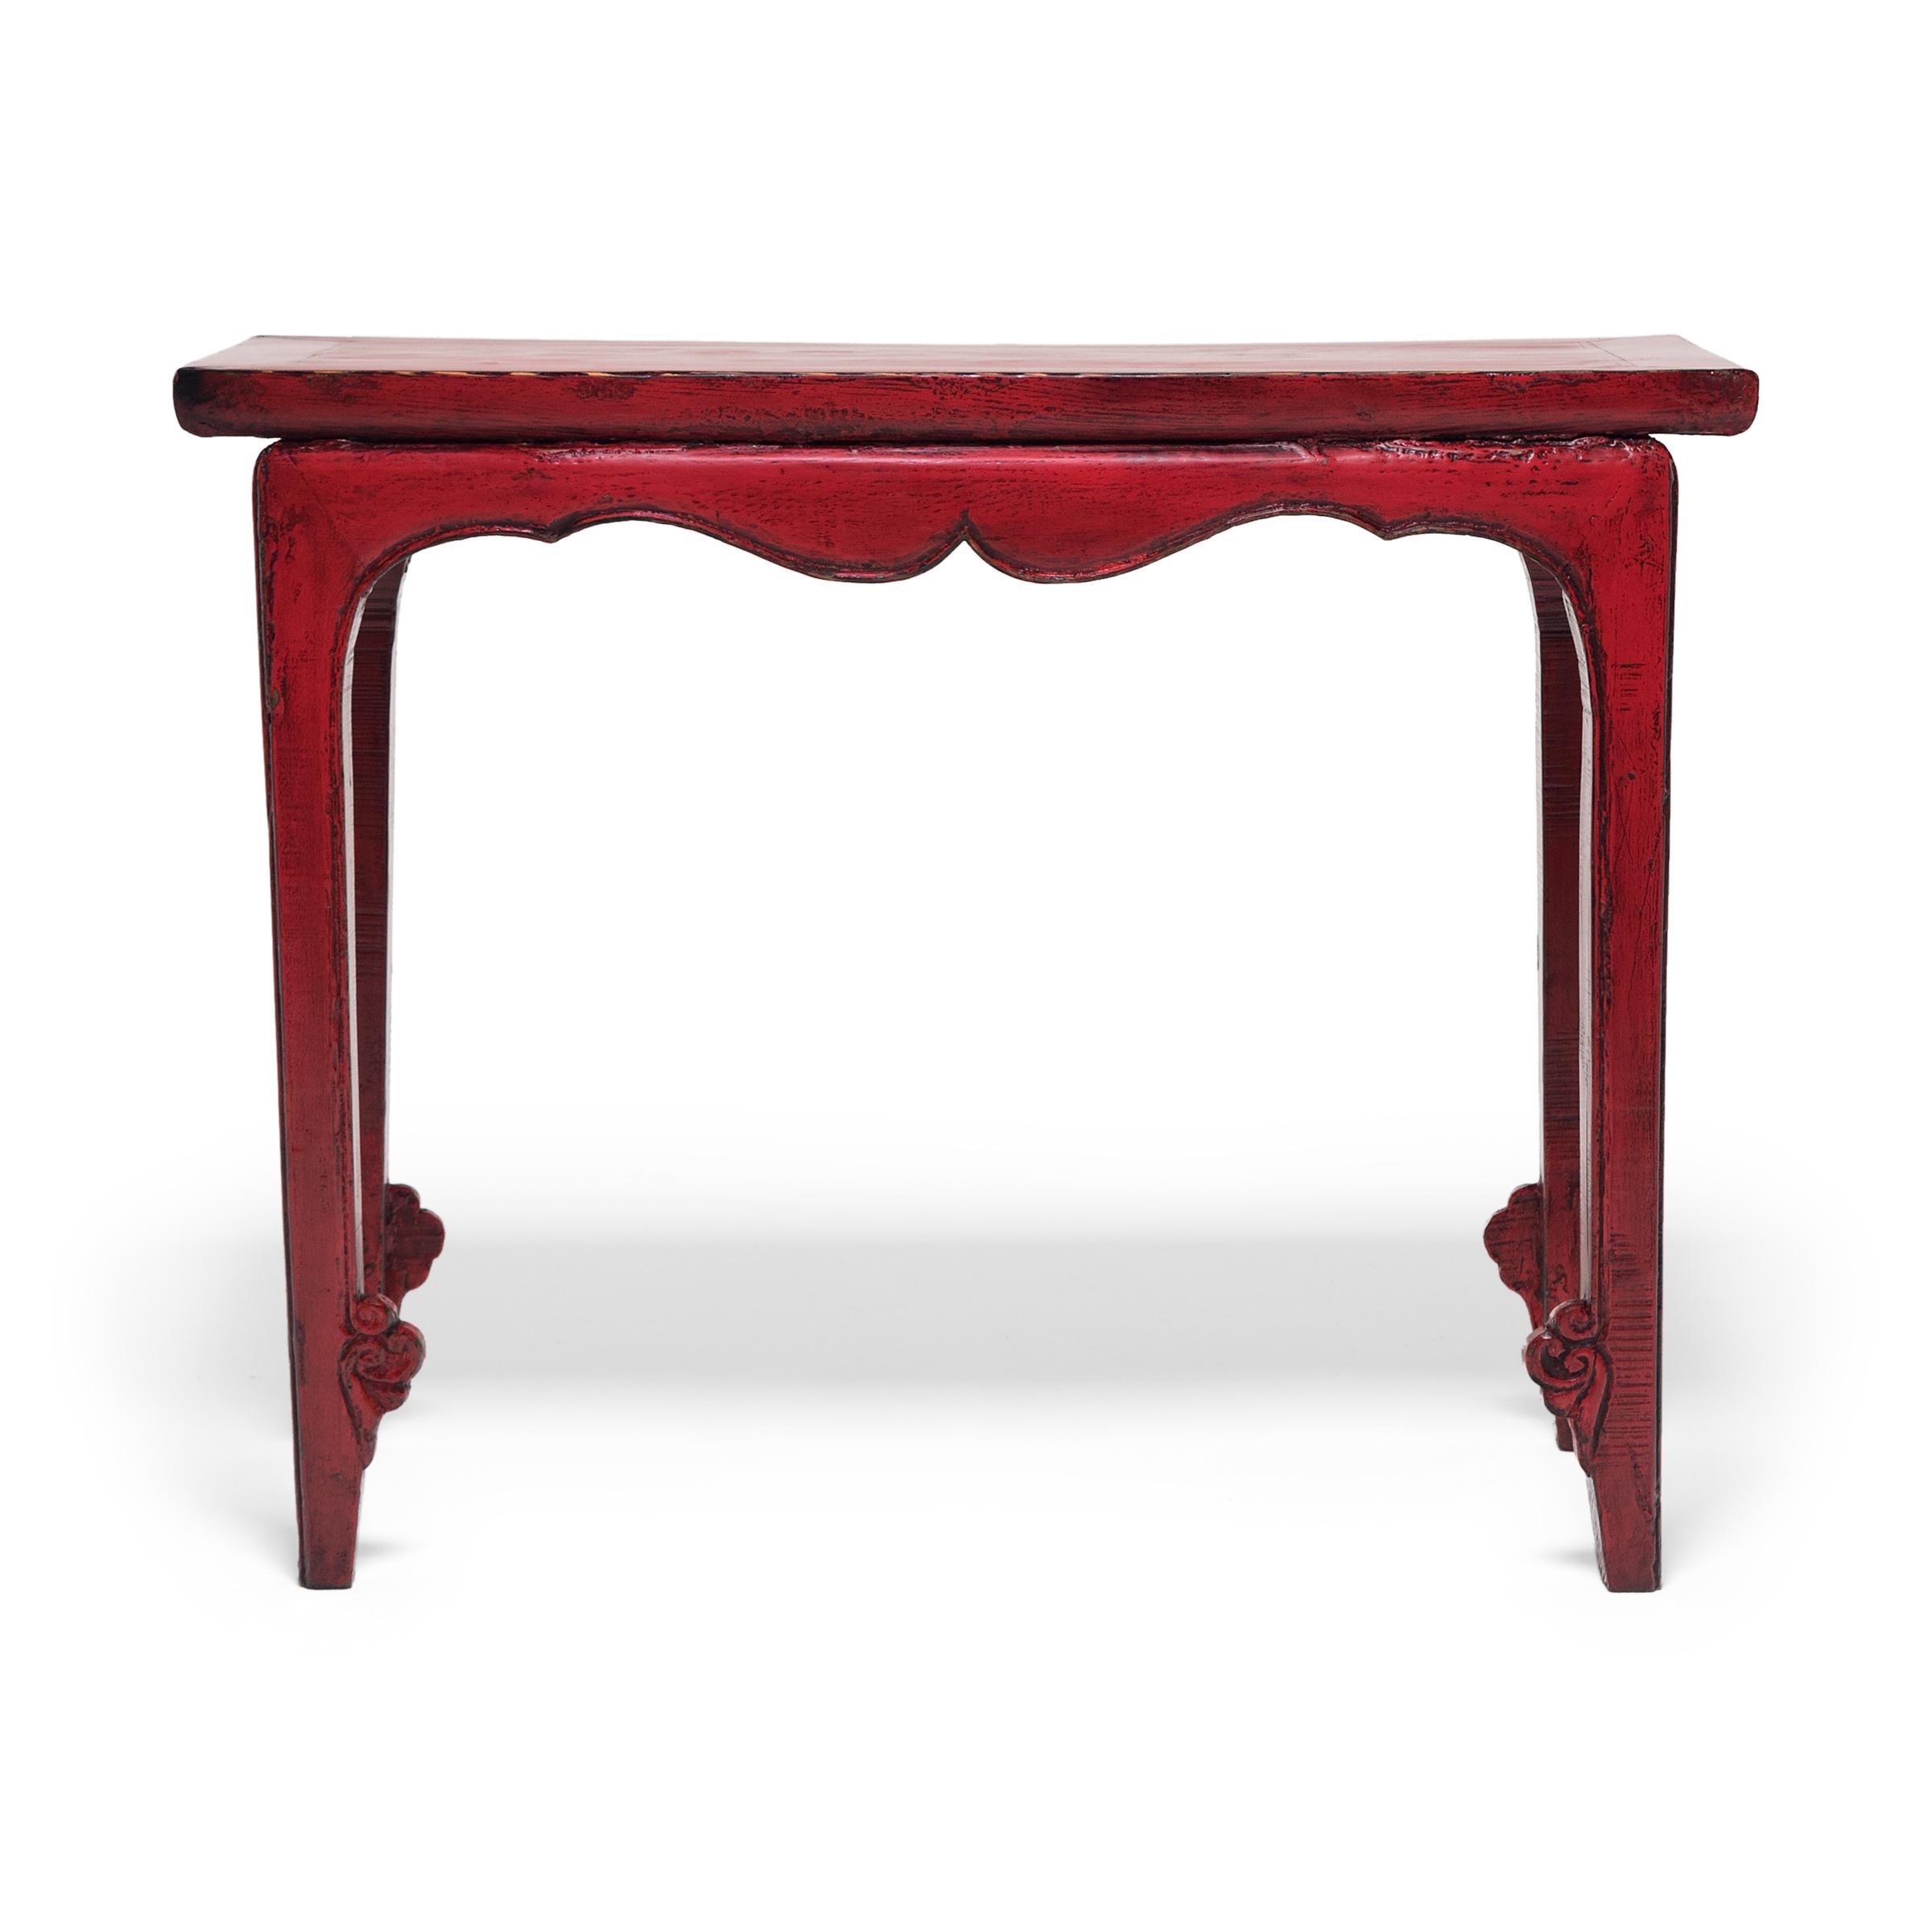 Lacquered Chinese Cinnabar Sword Leg Table, c. 1900